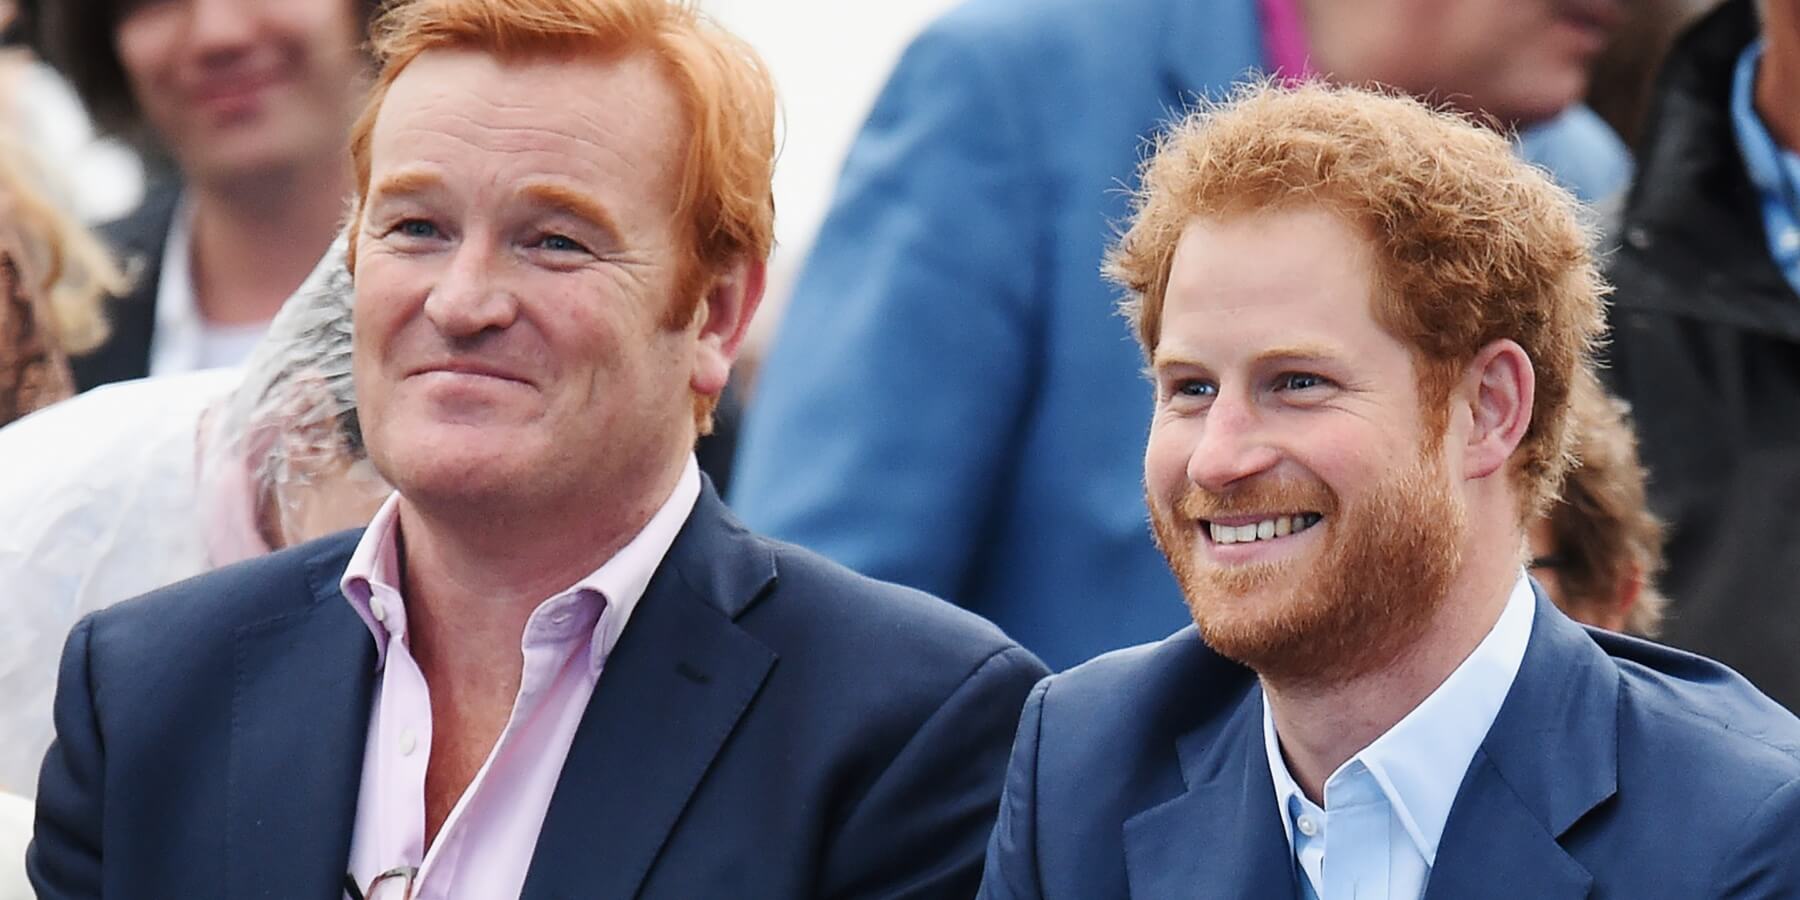 Mark Dyer and Prince Harry photographed at the Sentebale Concert at Kensington Palace in central London on June 28, 2016